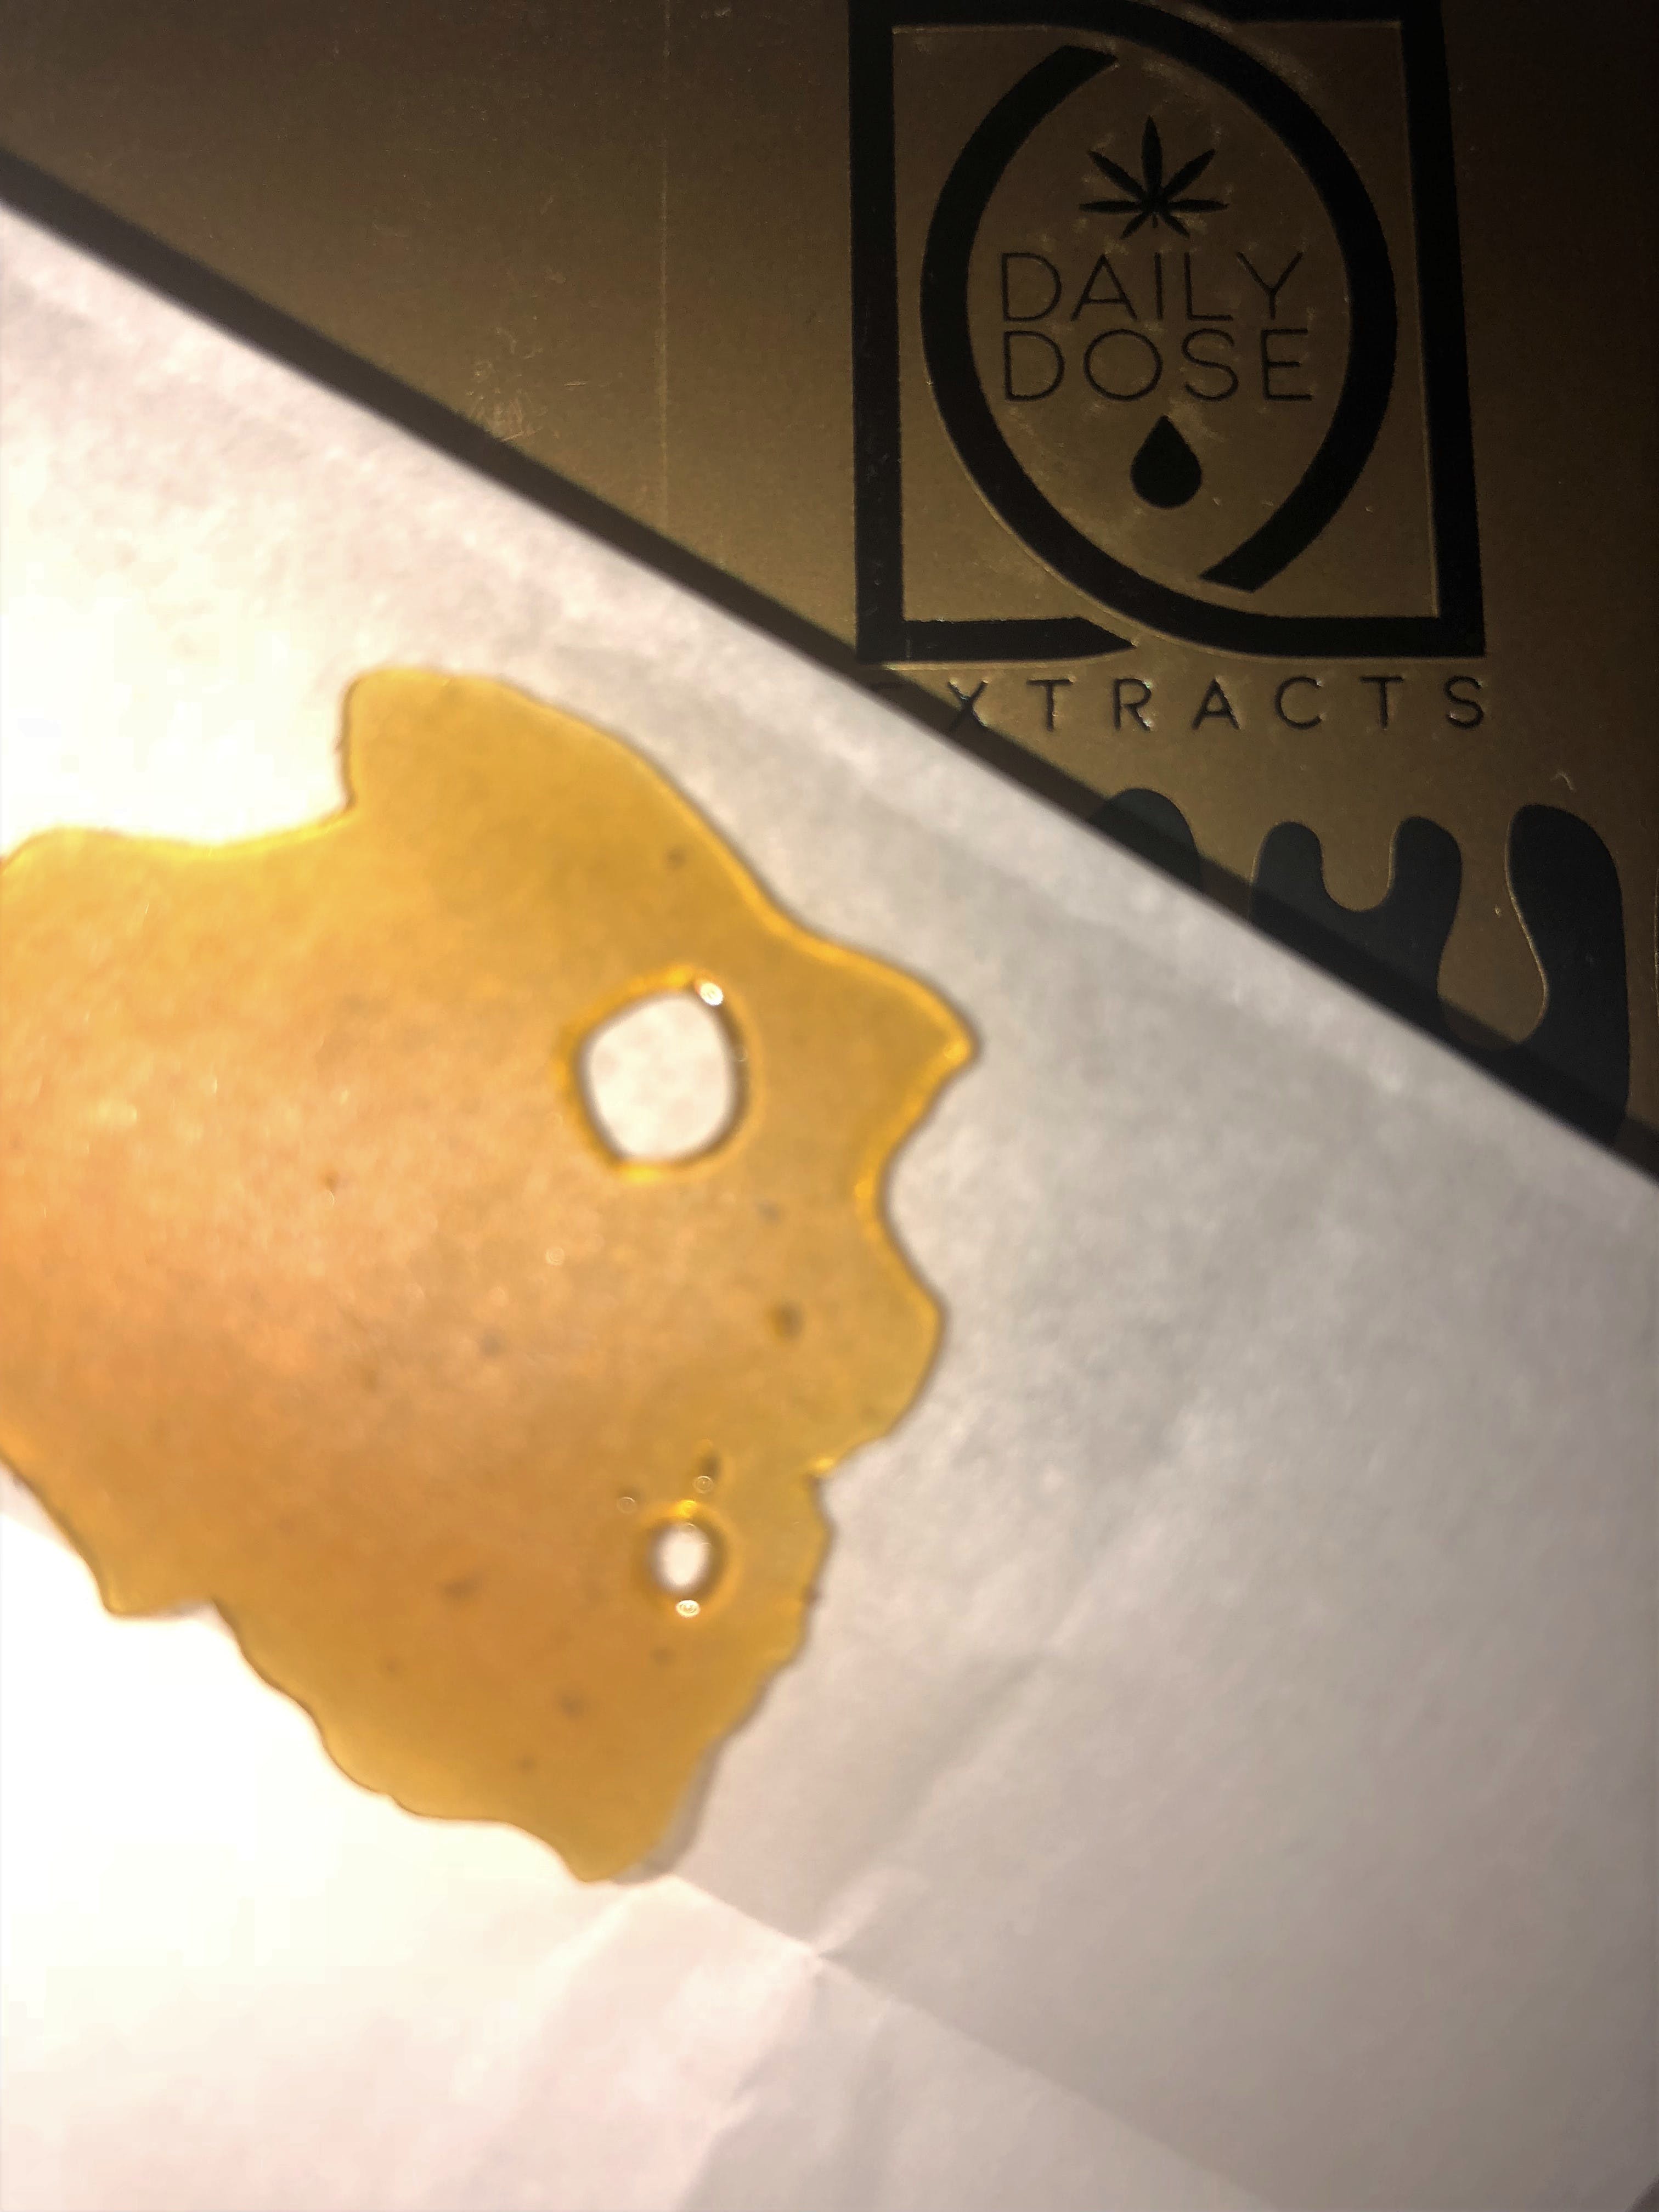 wax-daily-dose-extracts-bob-marley-shatter